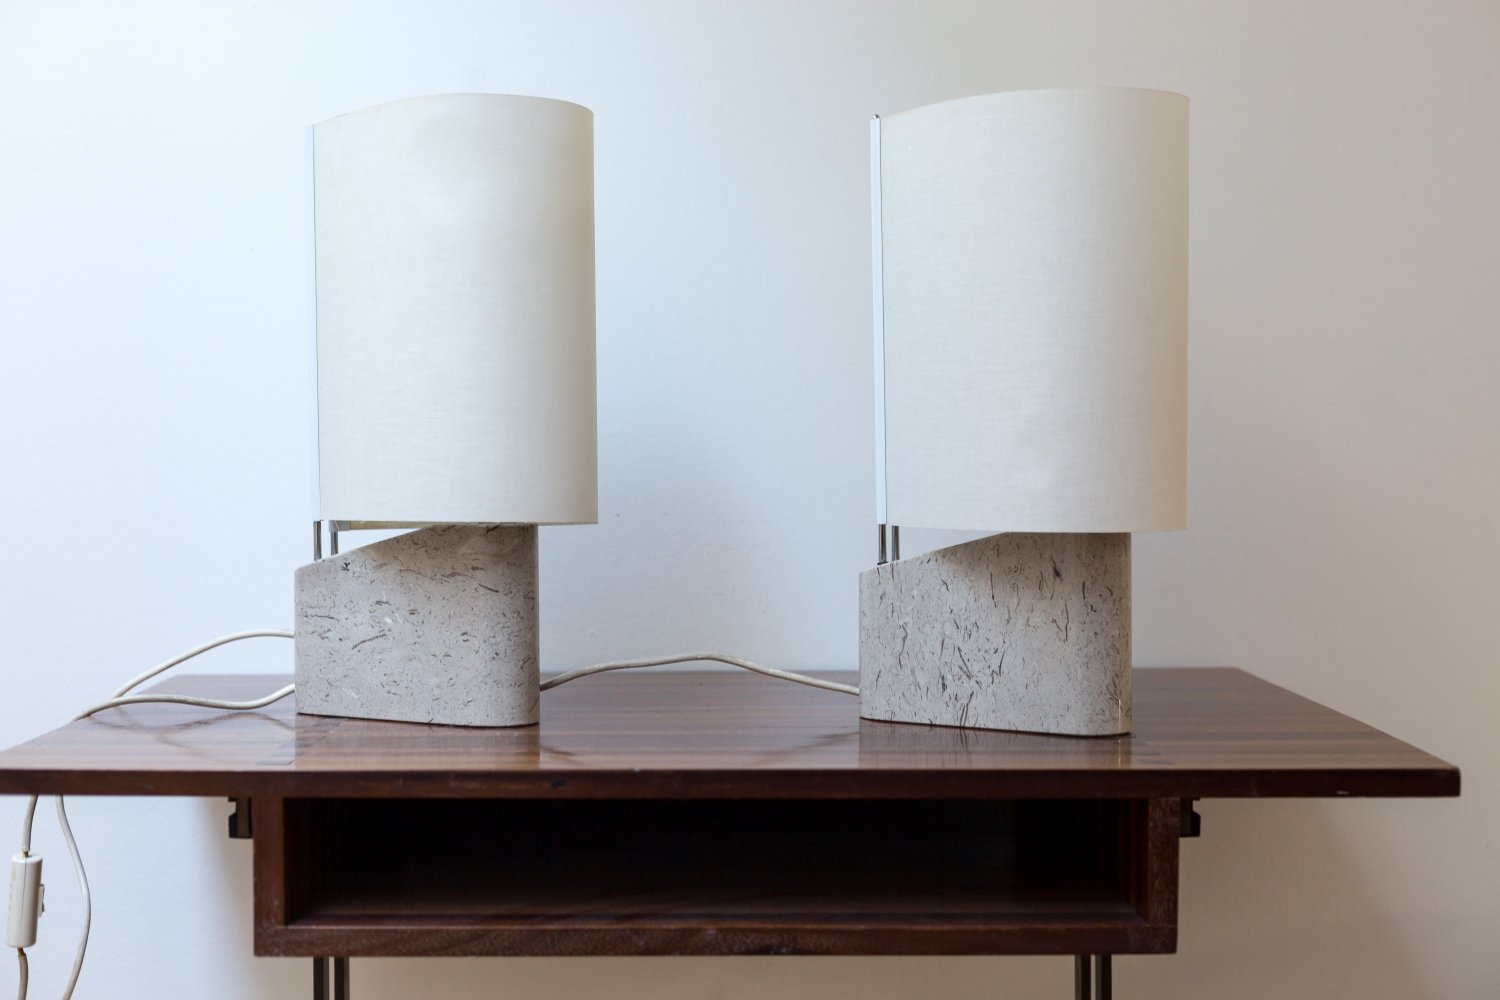 Pair of 'Ibis' lamps by Bruno Gecchelin for Skipper